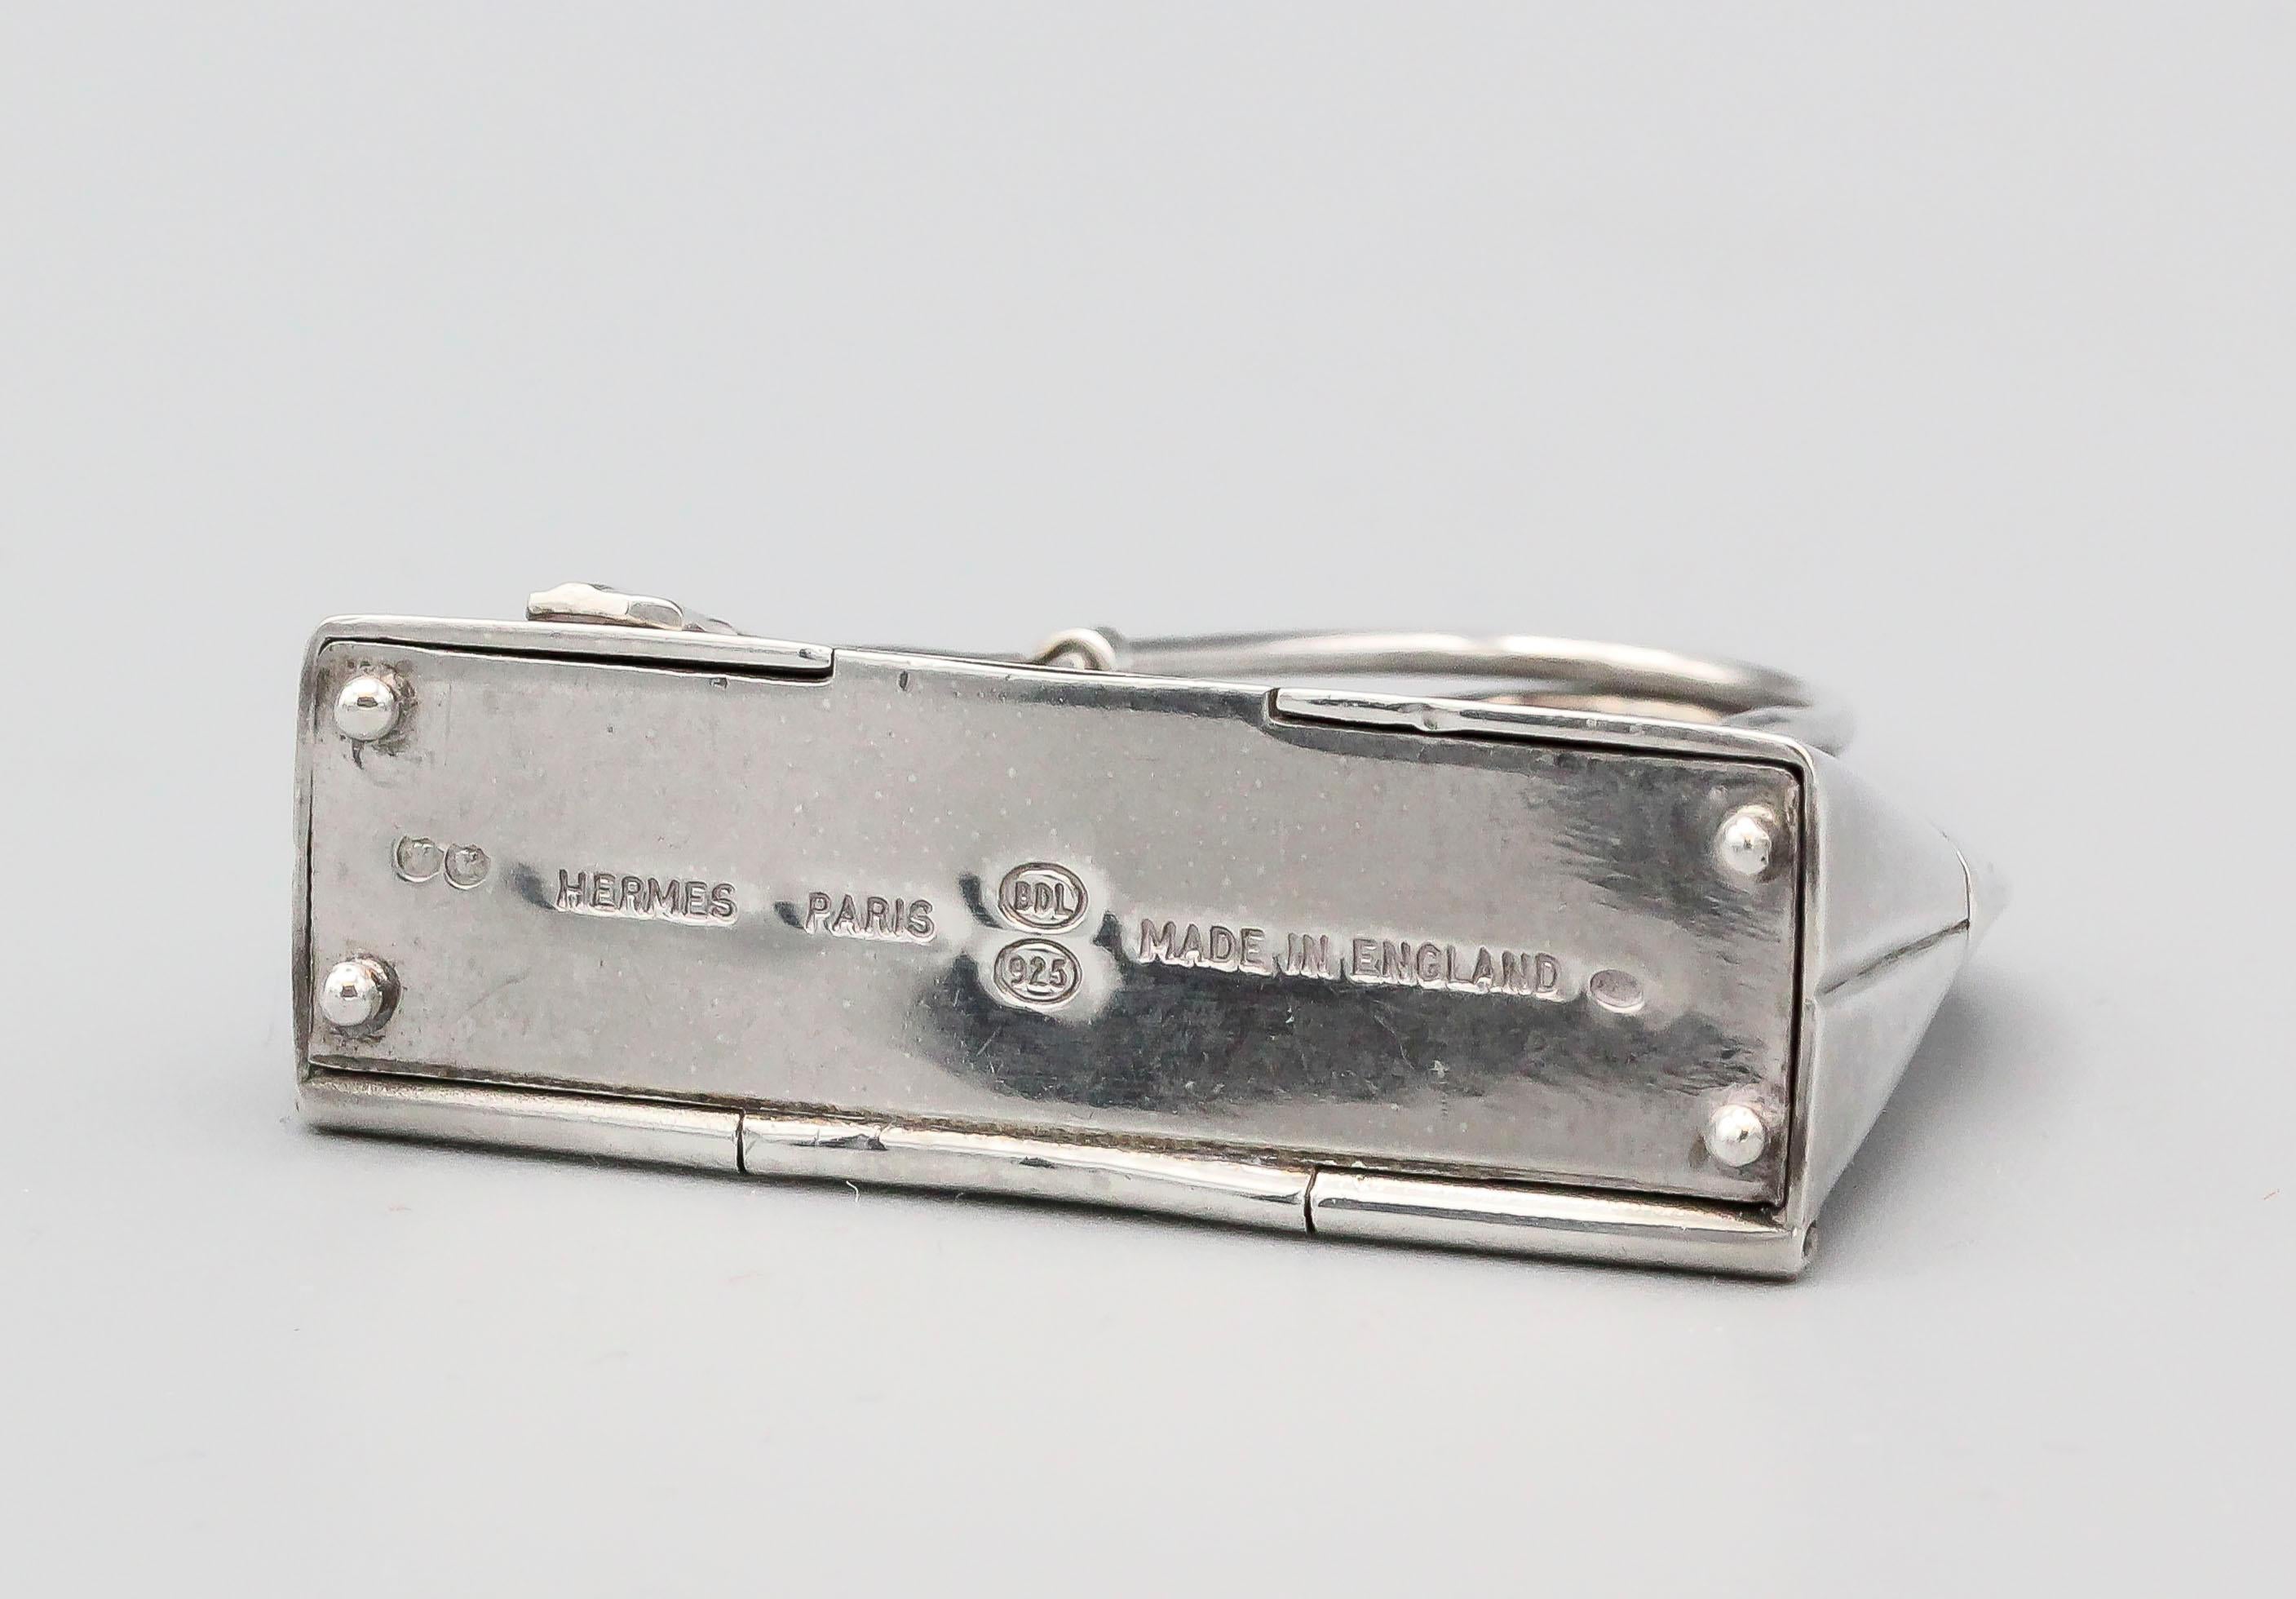 Fine sterling silver pill box in the likeness of an Hermes Bolide bag, by Hermes.  The box can be used in a multitude of ways: as a standard pillbox, a pendant, or as a charm.  Almost 2 inches wide and approx. 30 grams in weight.

This Hermes pill